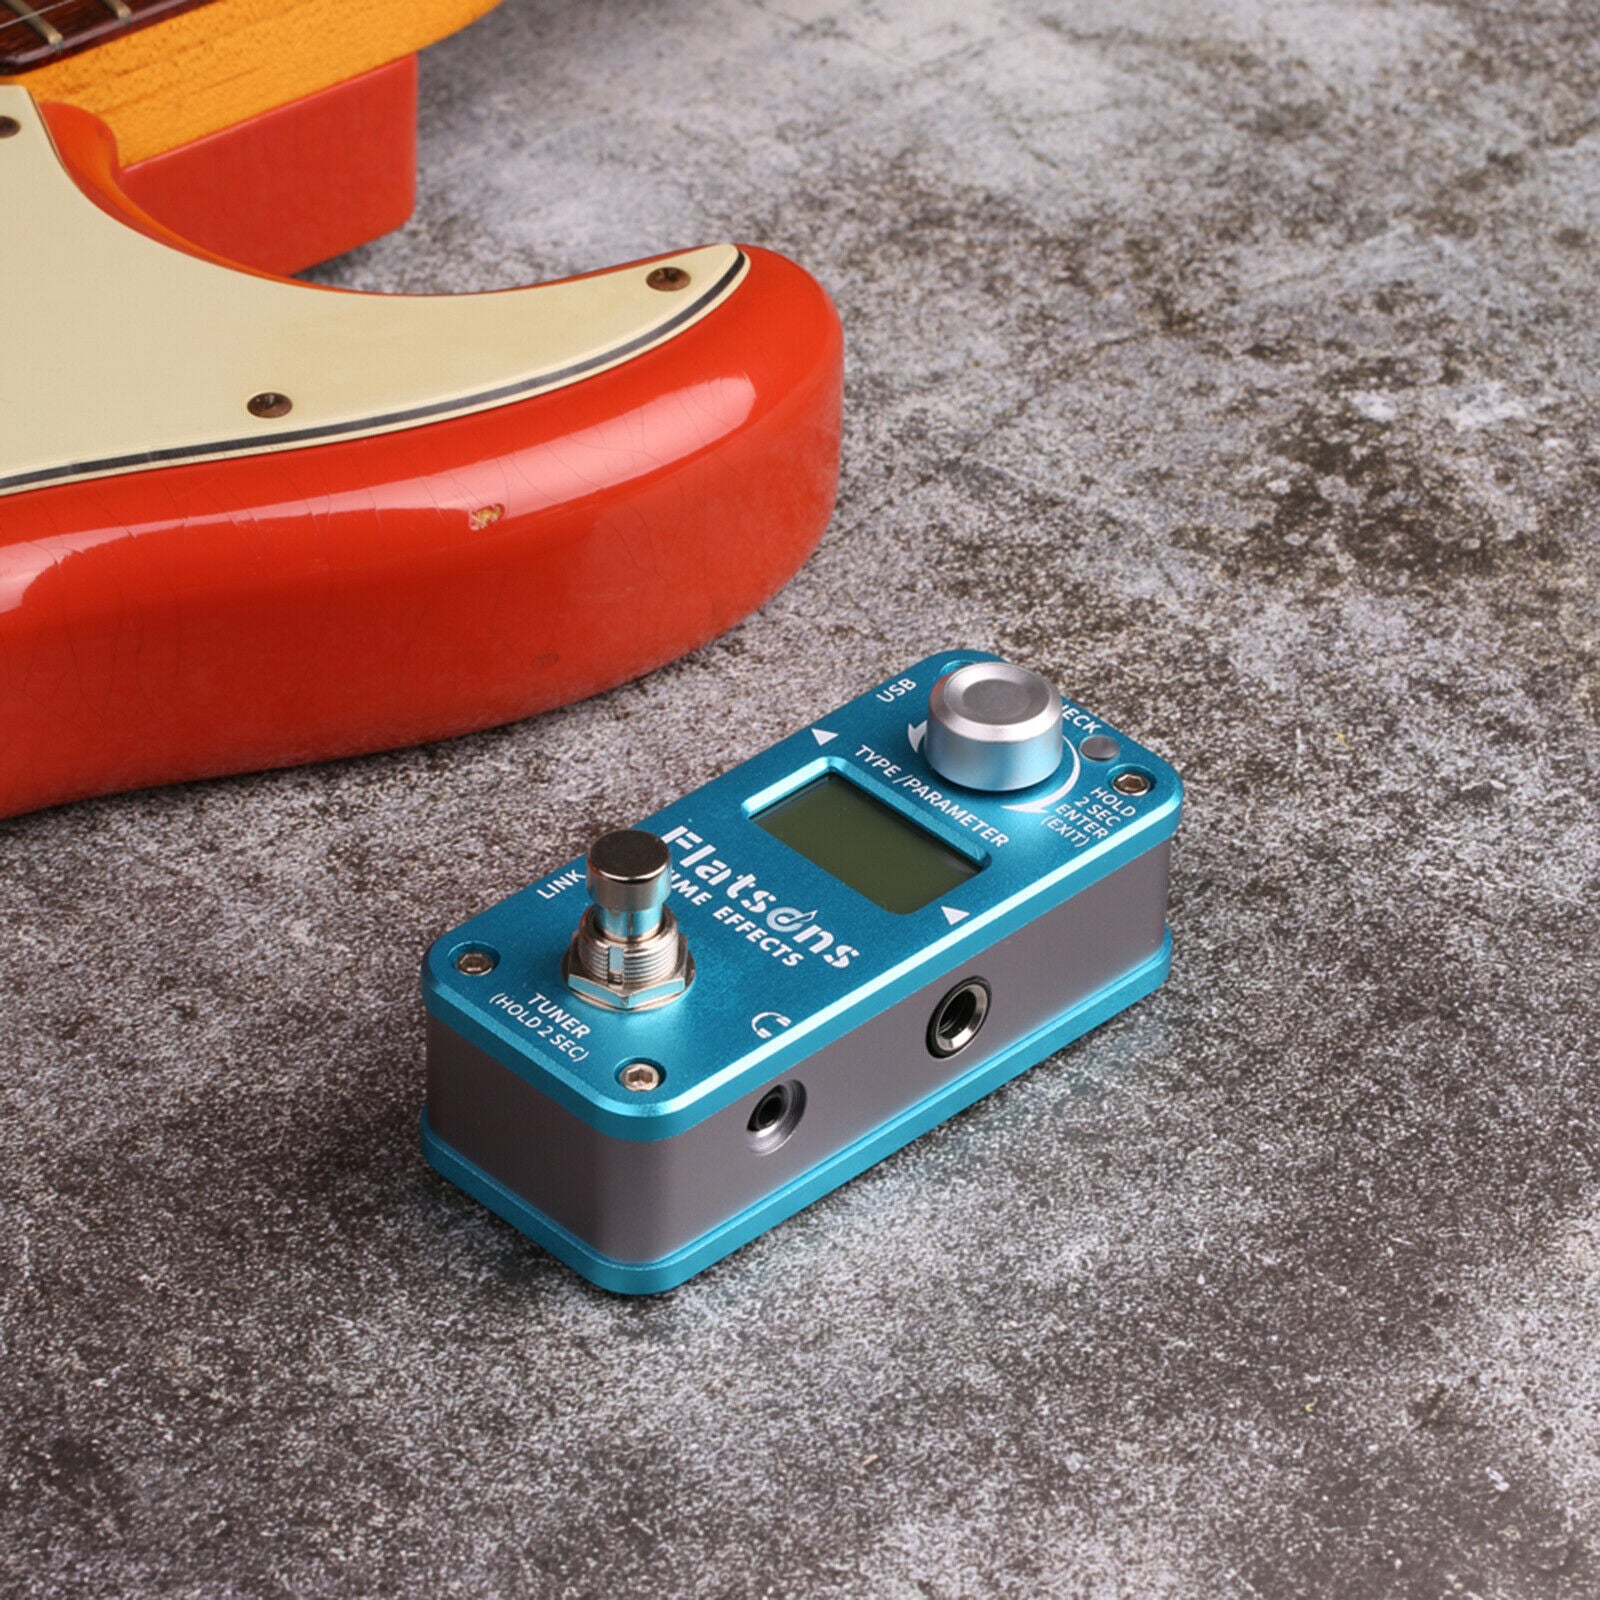 Guitar Effect Pedal LED Indicator Hardware Pass-Through with Tuning Function